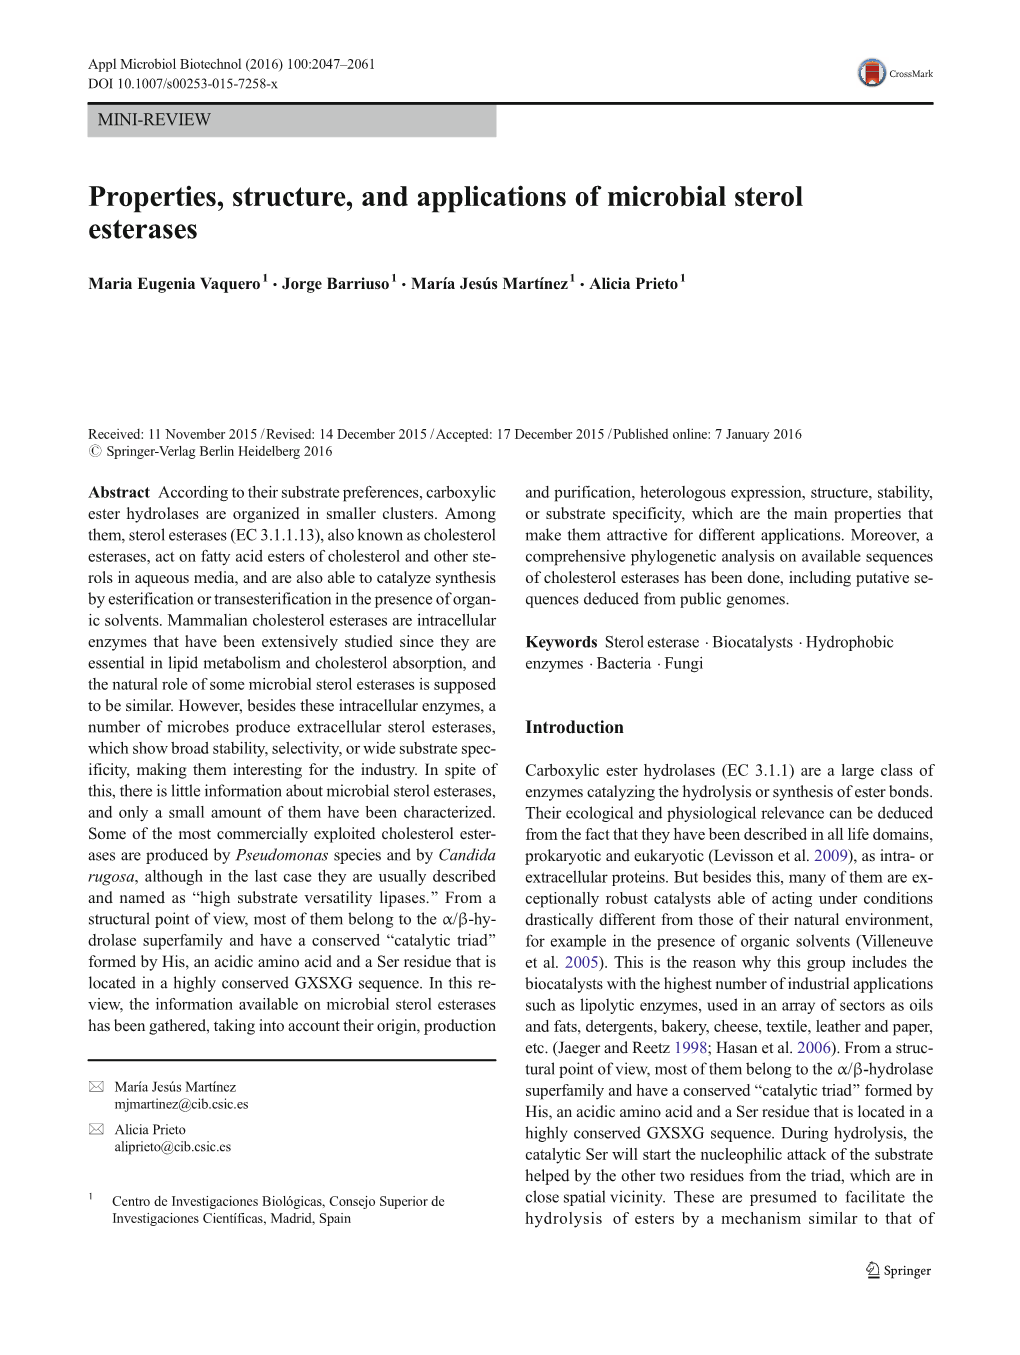 Properties, Structure, and Applications of Microbial Sterol Esterases